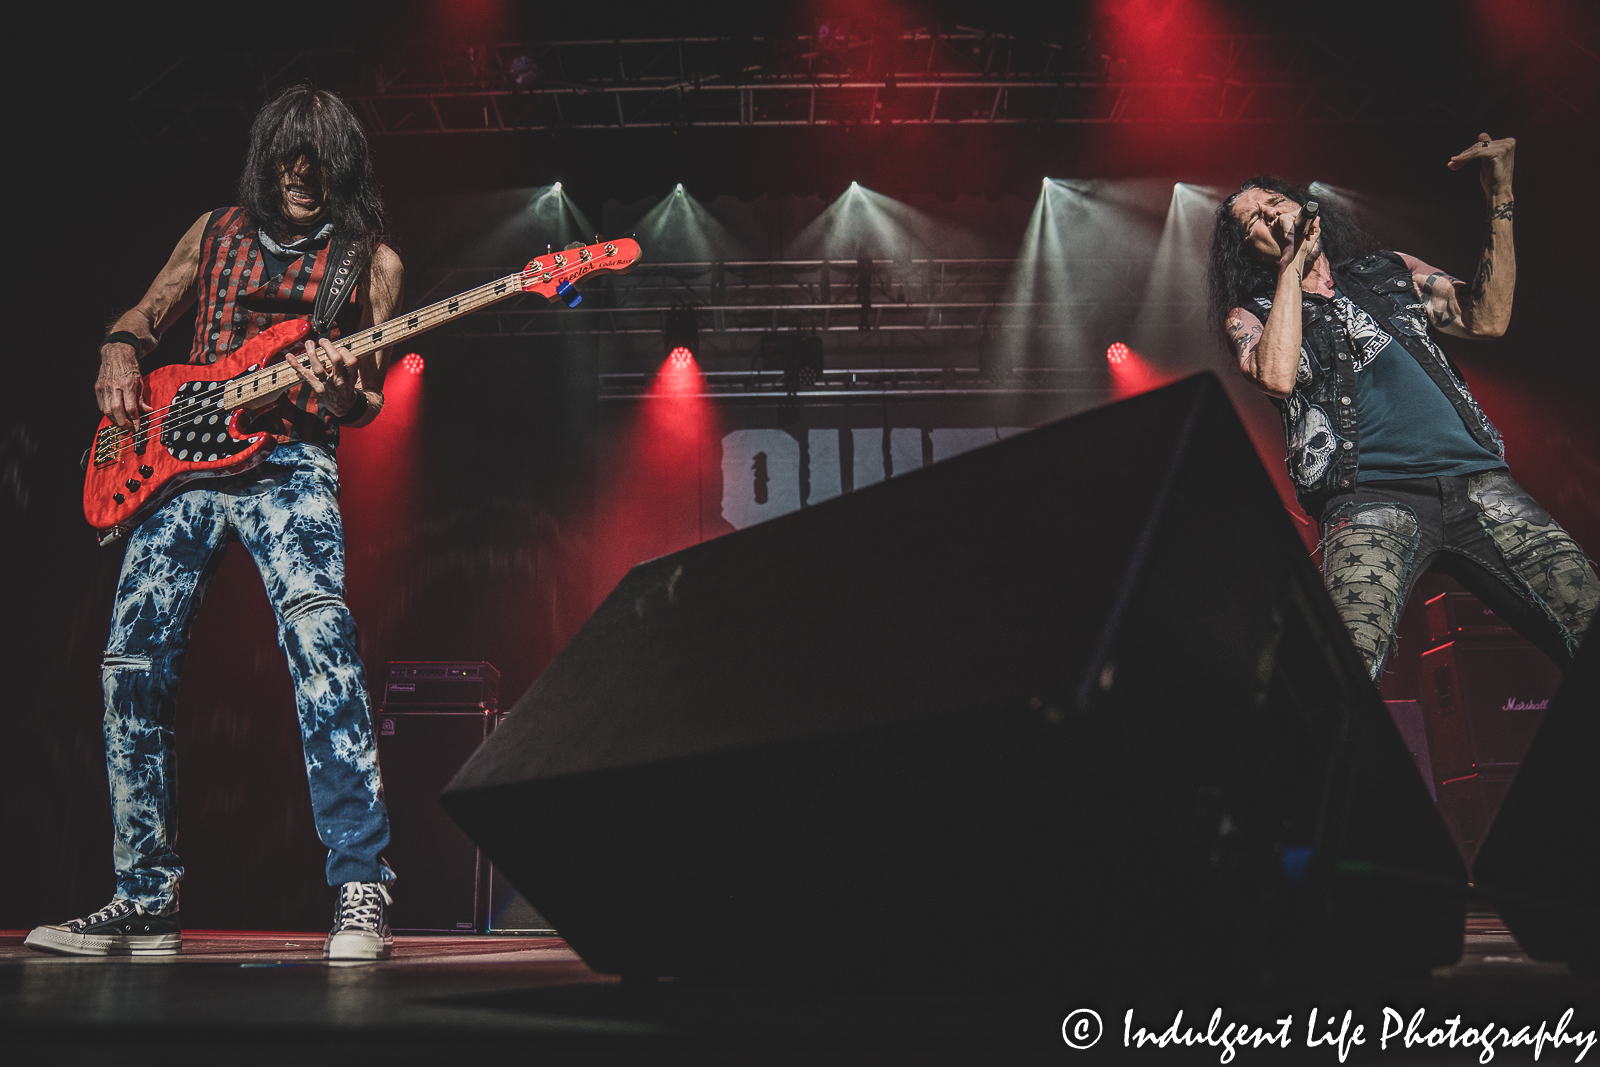 Quiet Riot bass guitarist Rudy Sarzo and frontman Jizzy Pearl live in concert together at Ameristar Casino in Kansas City, MO on July 29, 2022.